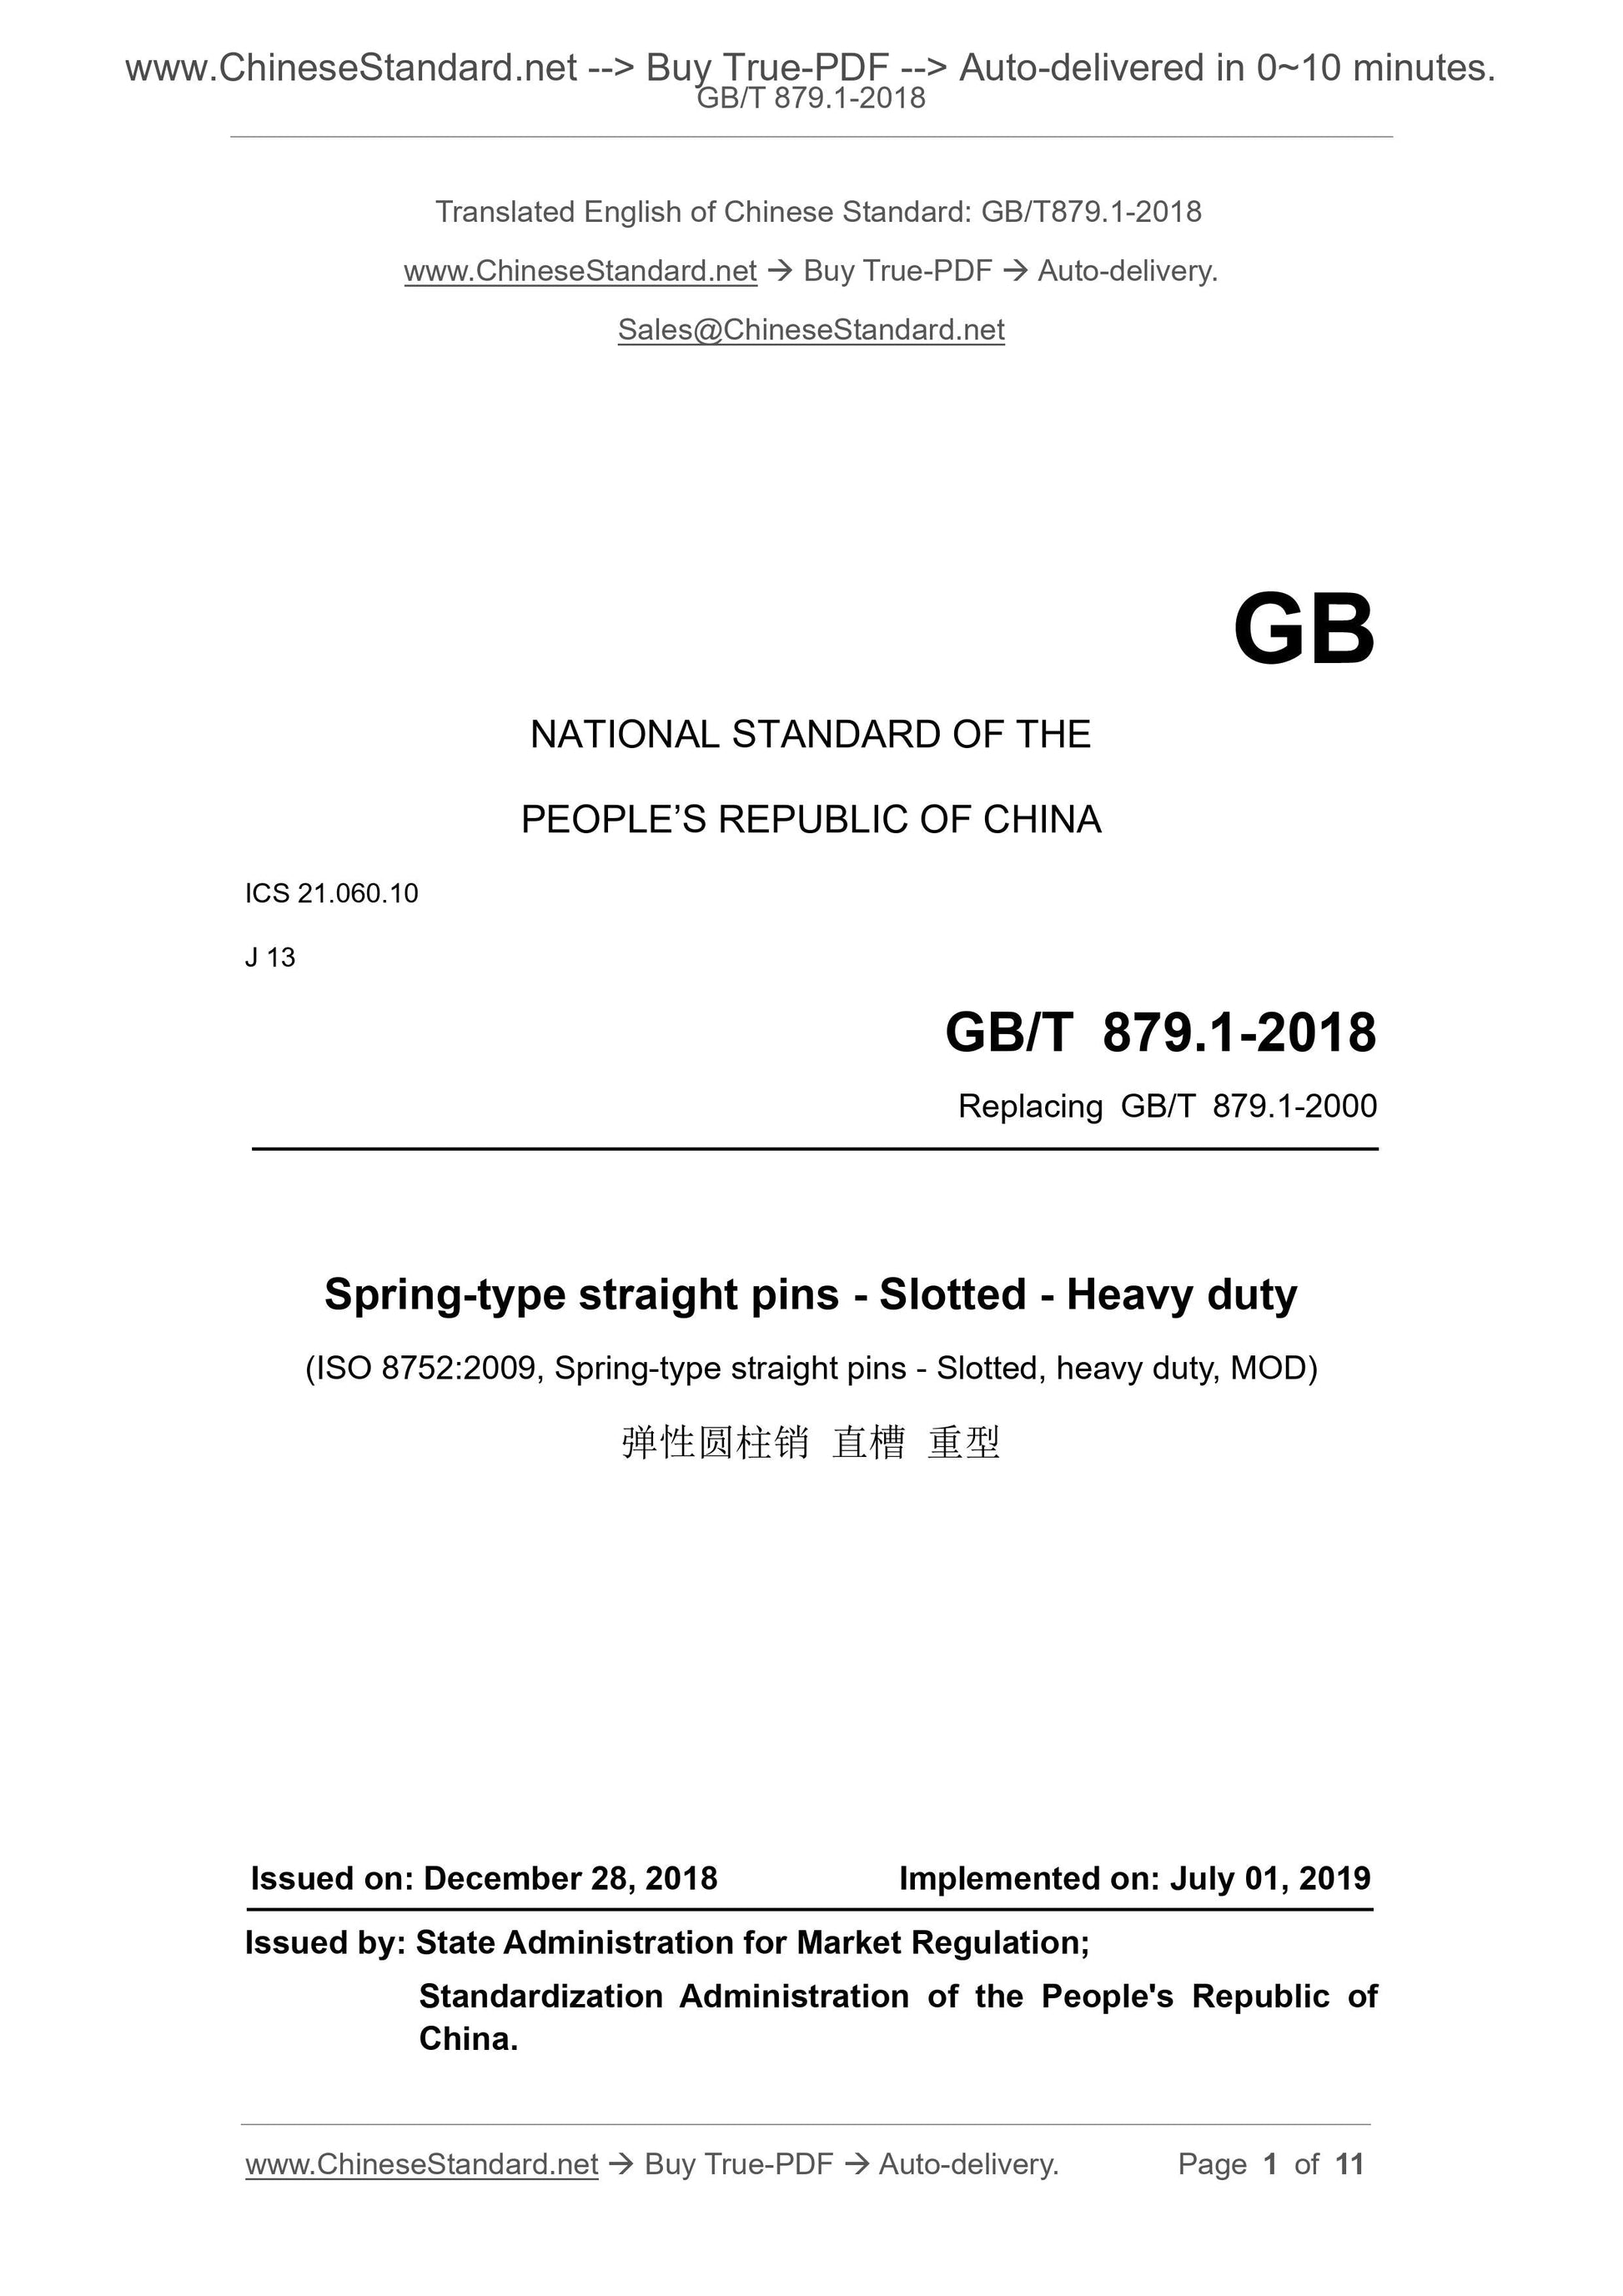 GB/T 879.1-2018 Page 1